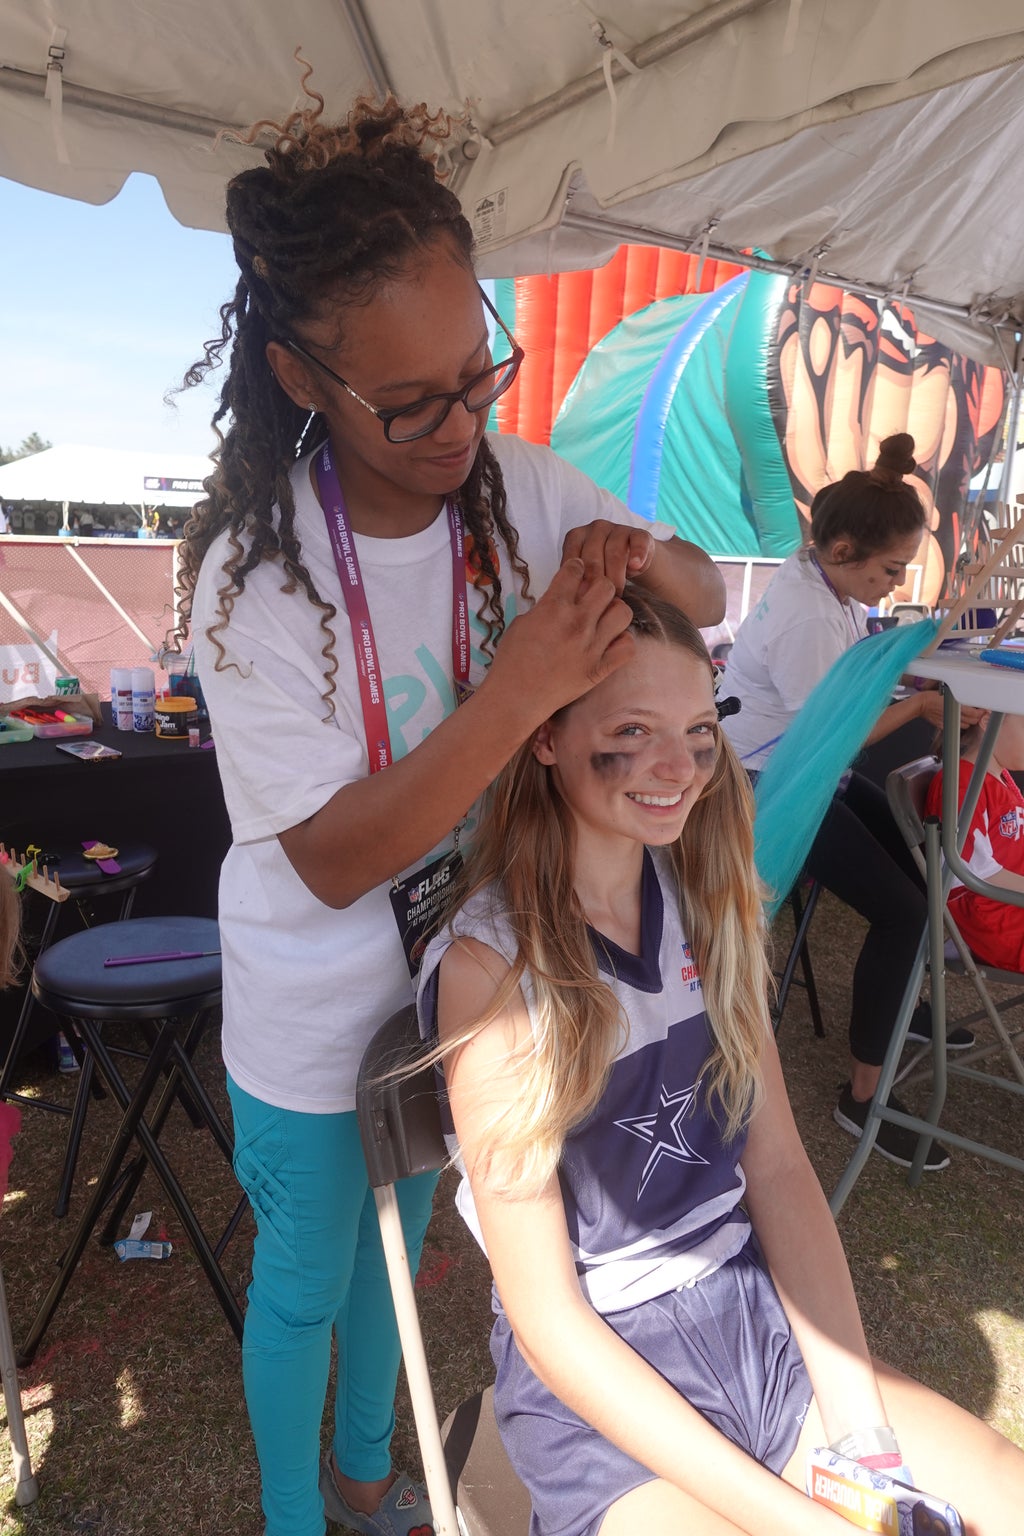 An image of a young girl with a Cowboys logo on her jersey smiling while getting her hair braided under a tent